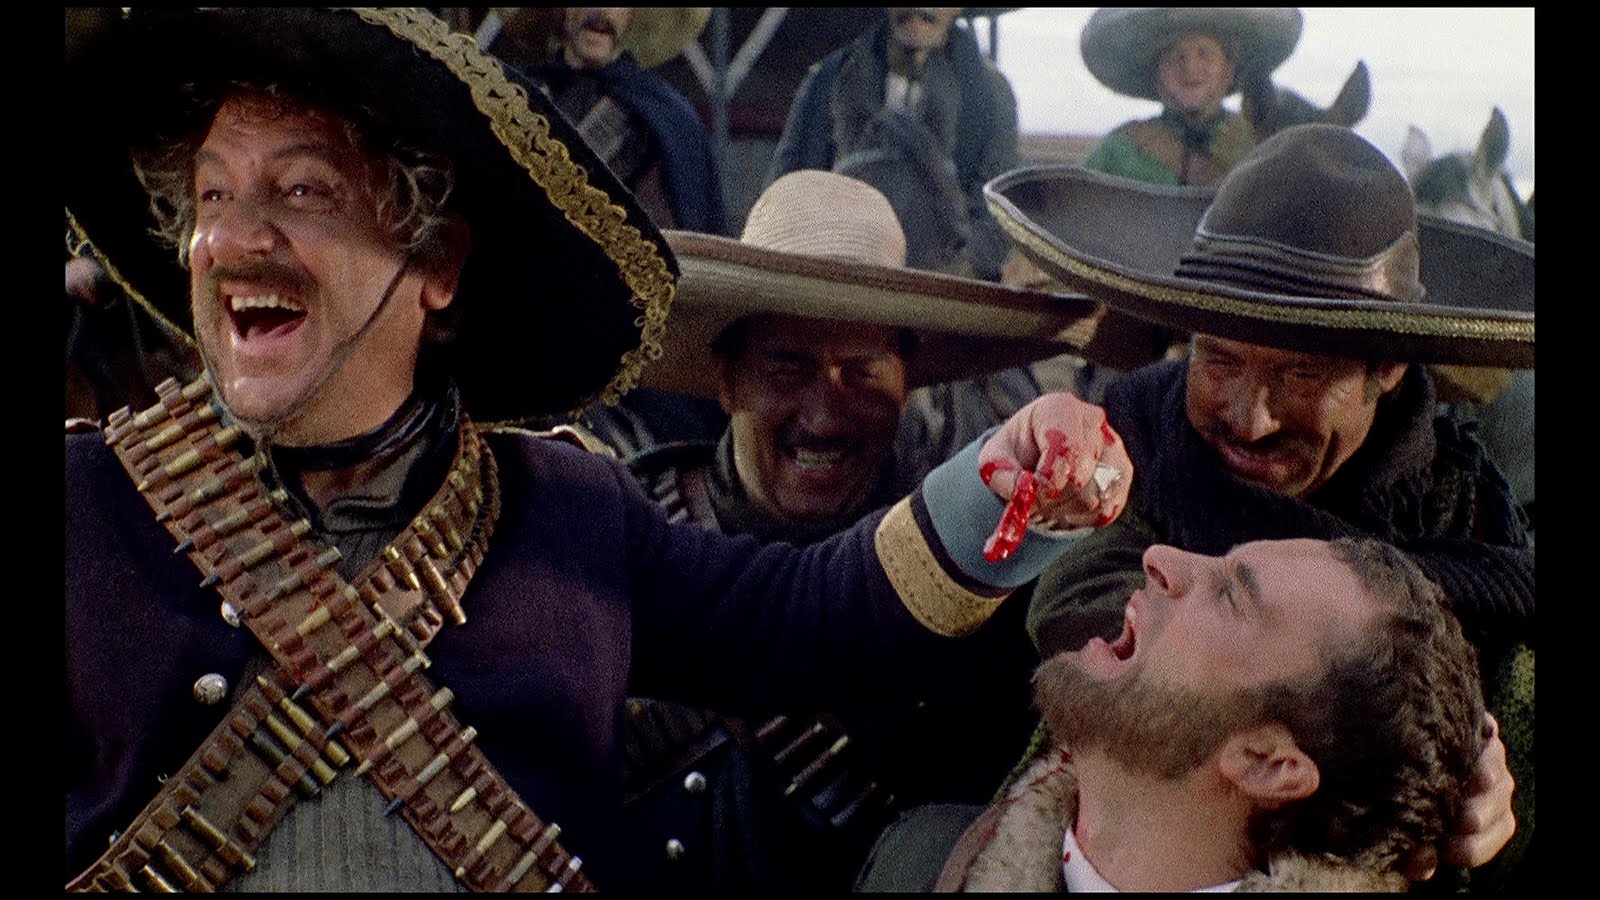 Spaghetti westerns with horror elements! 